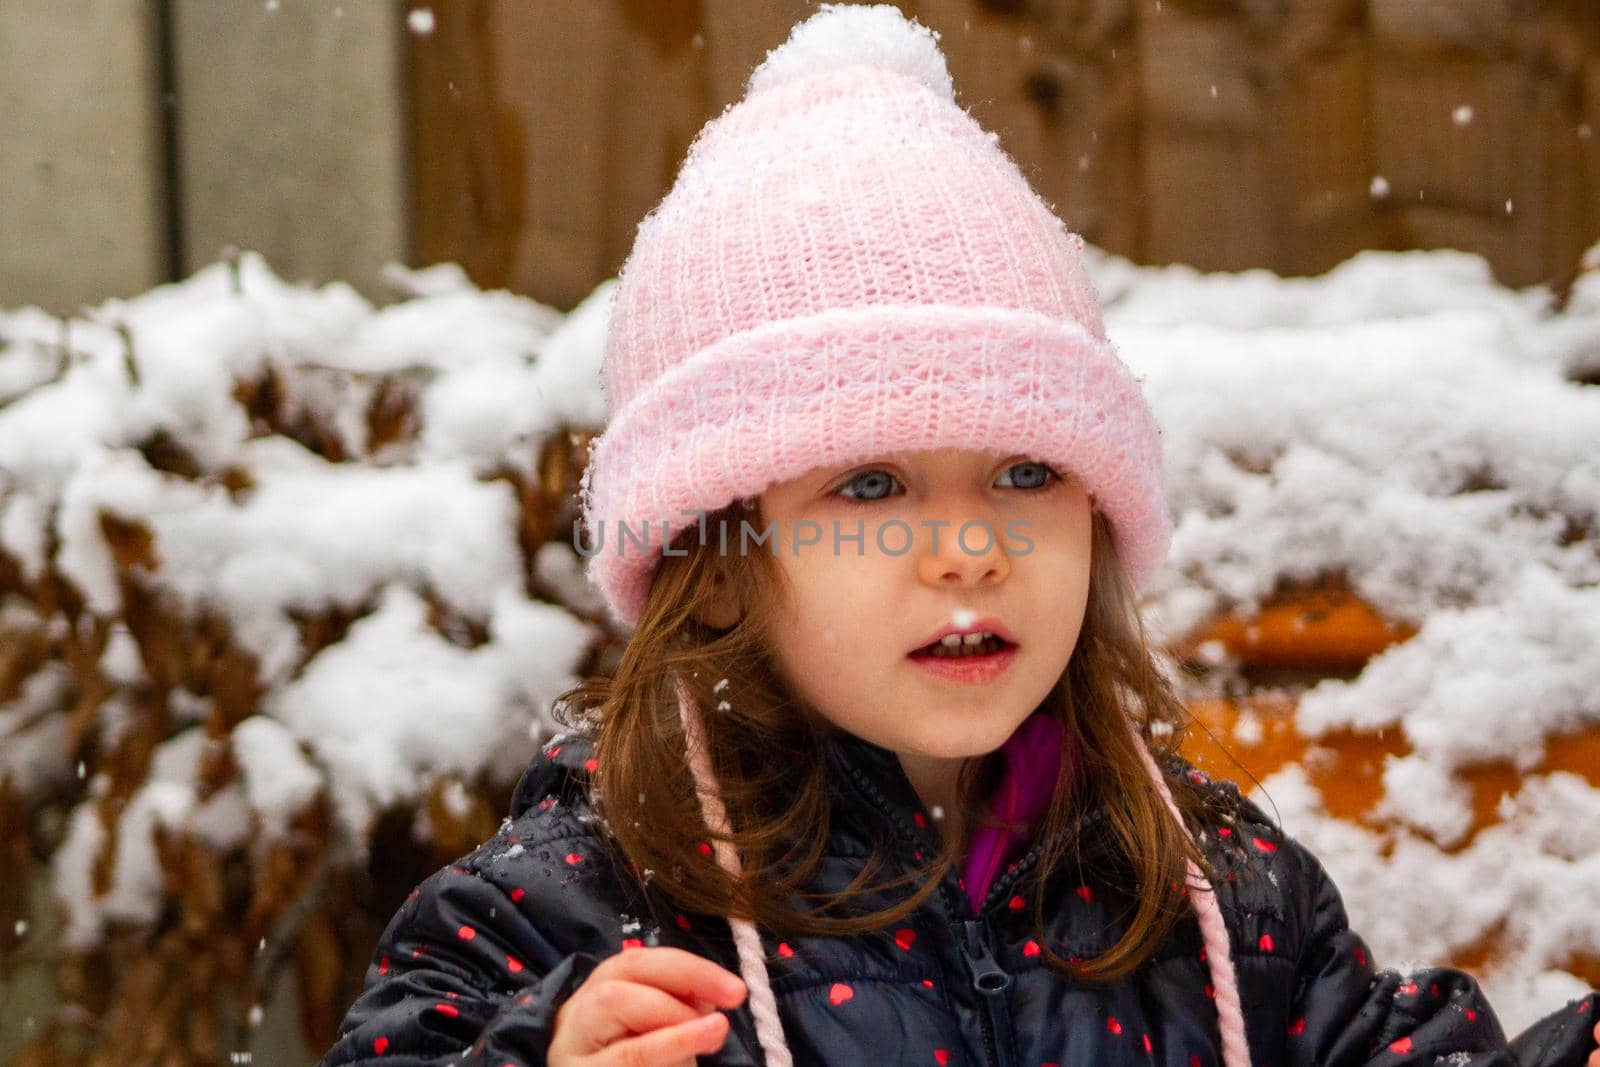 Portrait of a cute, blue-eyed, brown-haired girl wearing a pink hat and ablue coat in the snow